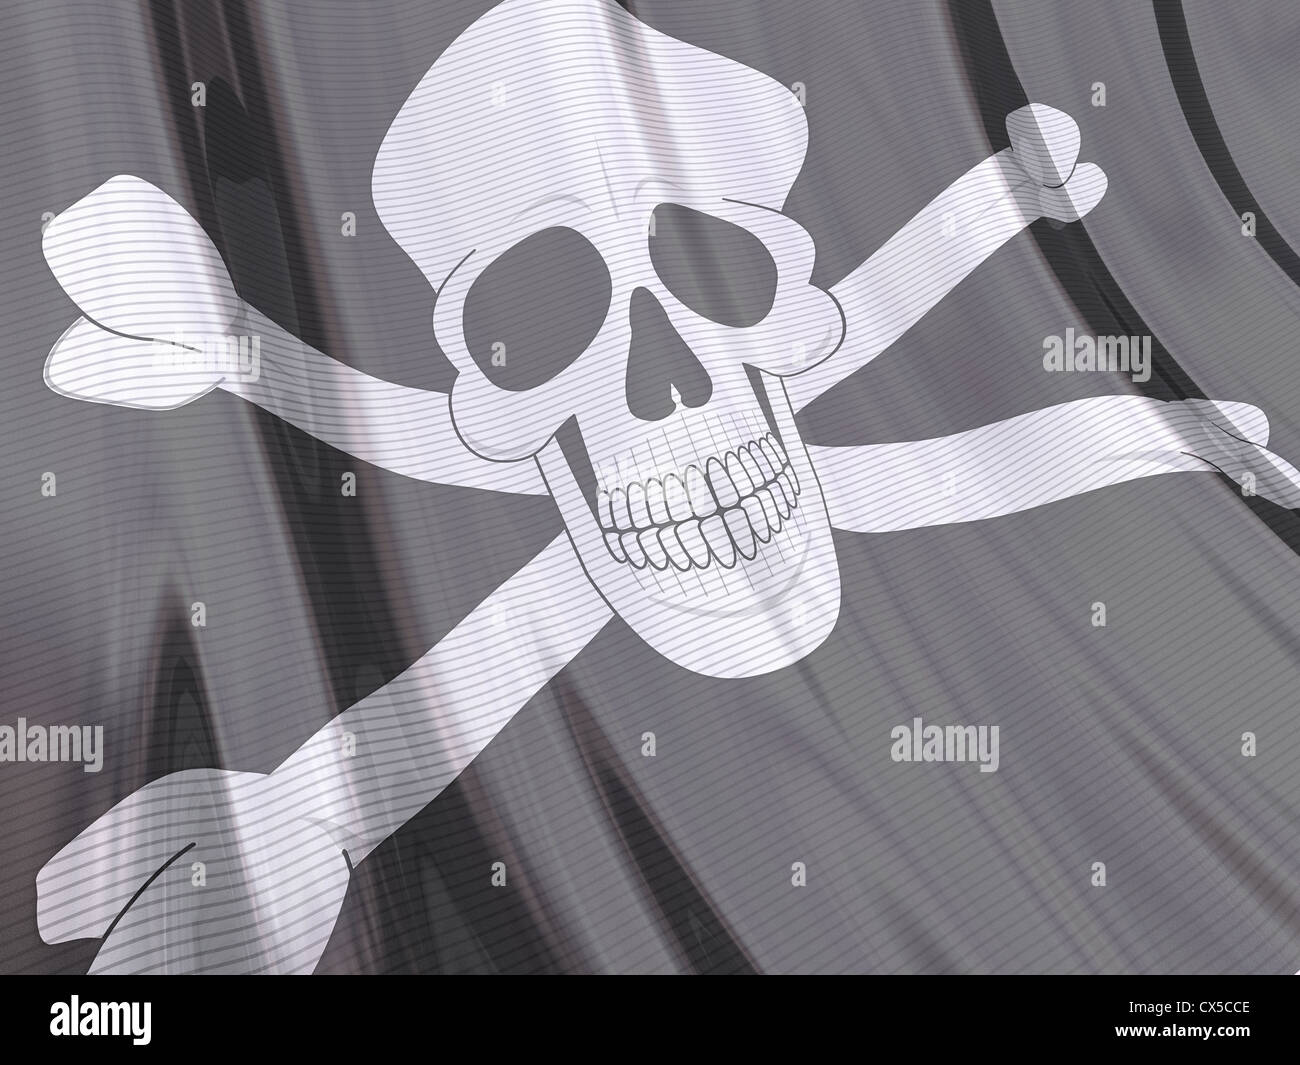 Glossy flag of Pirate. Stock Photo